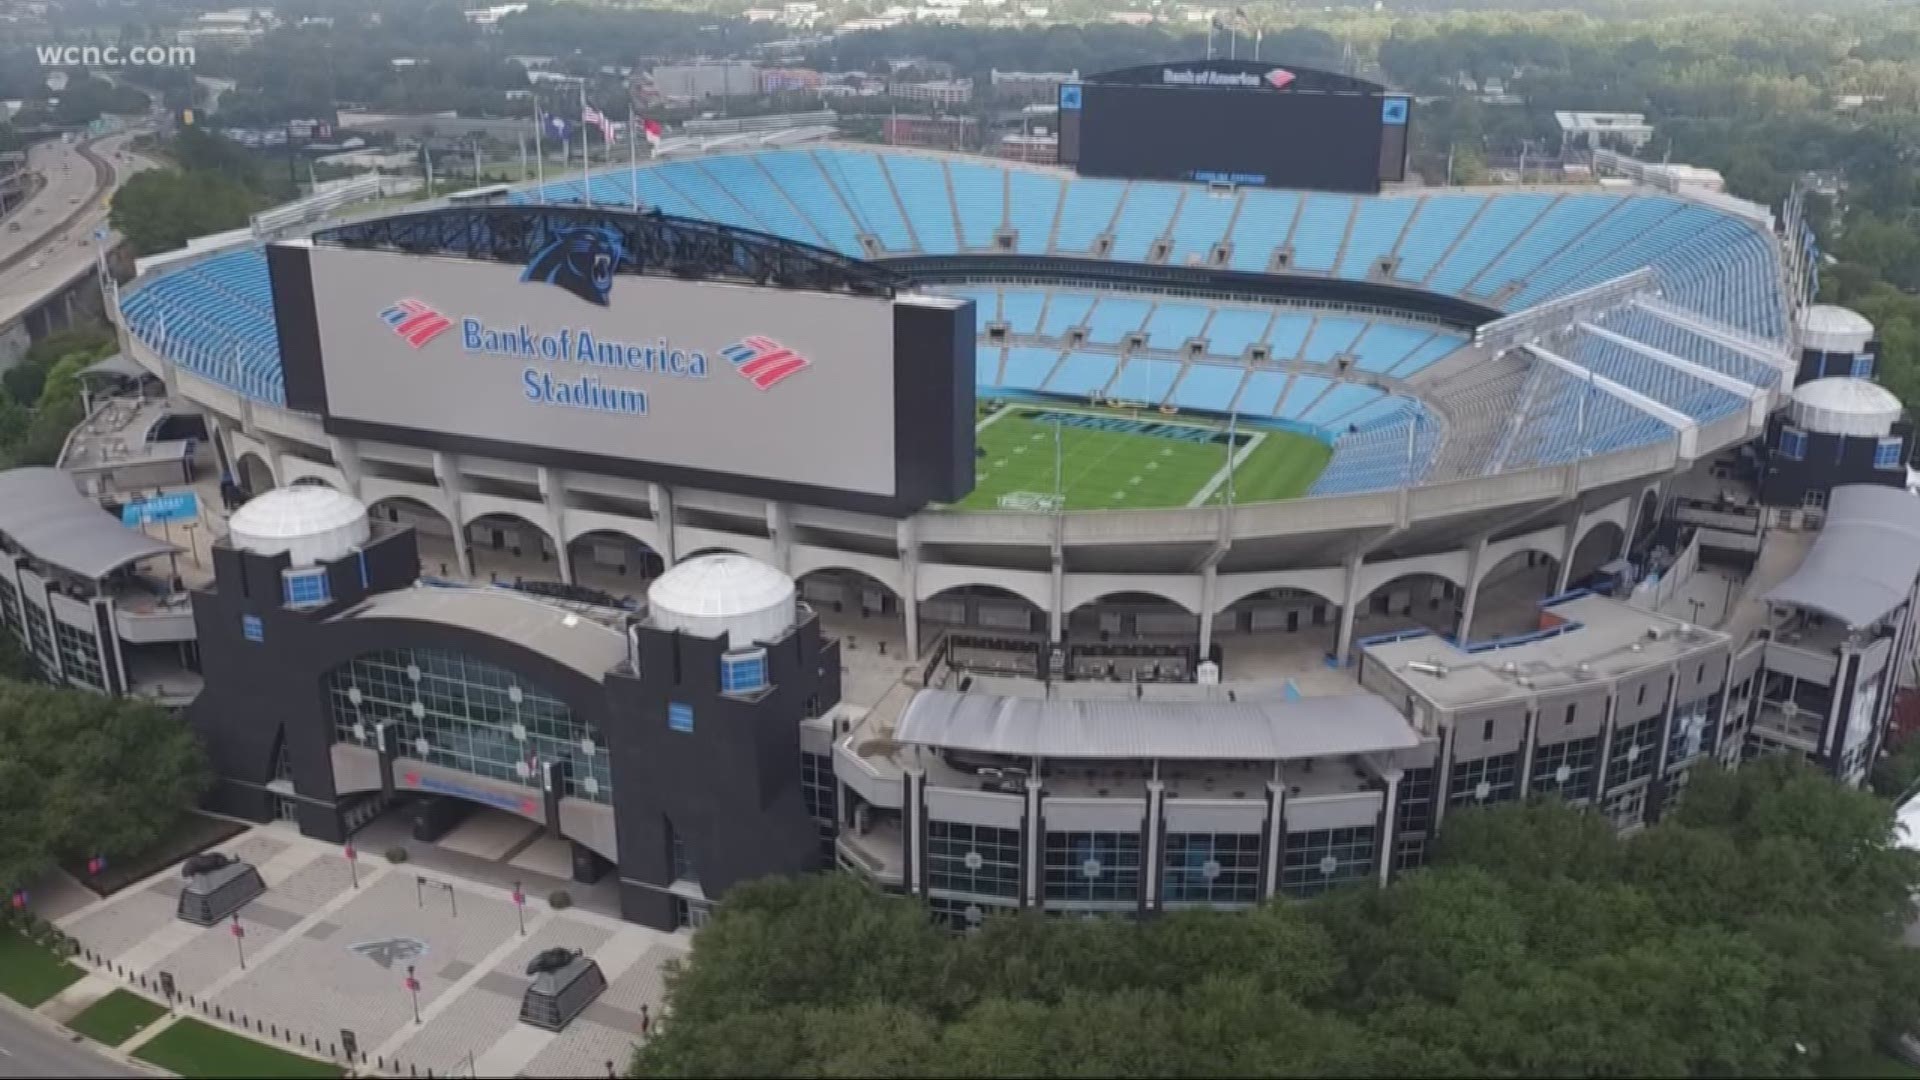 Panthers owner David Tepper interested in moving team's practice facility to South Carolina